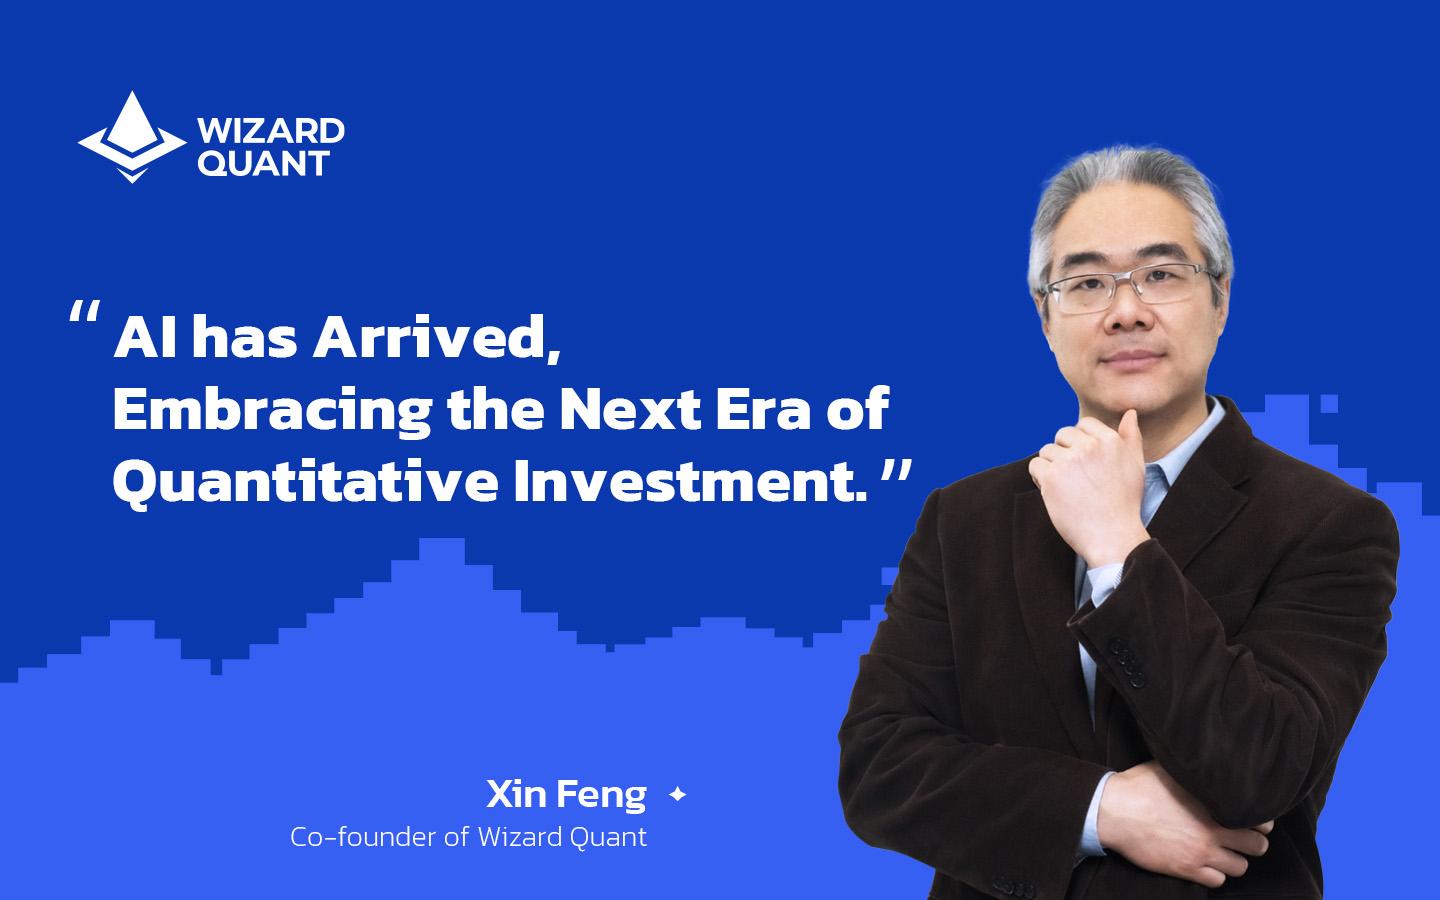 Wizard Quant Co-founder Xin Feng: AI has Arrived, Embracing the Next Era of Quantitative Investment